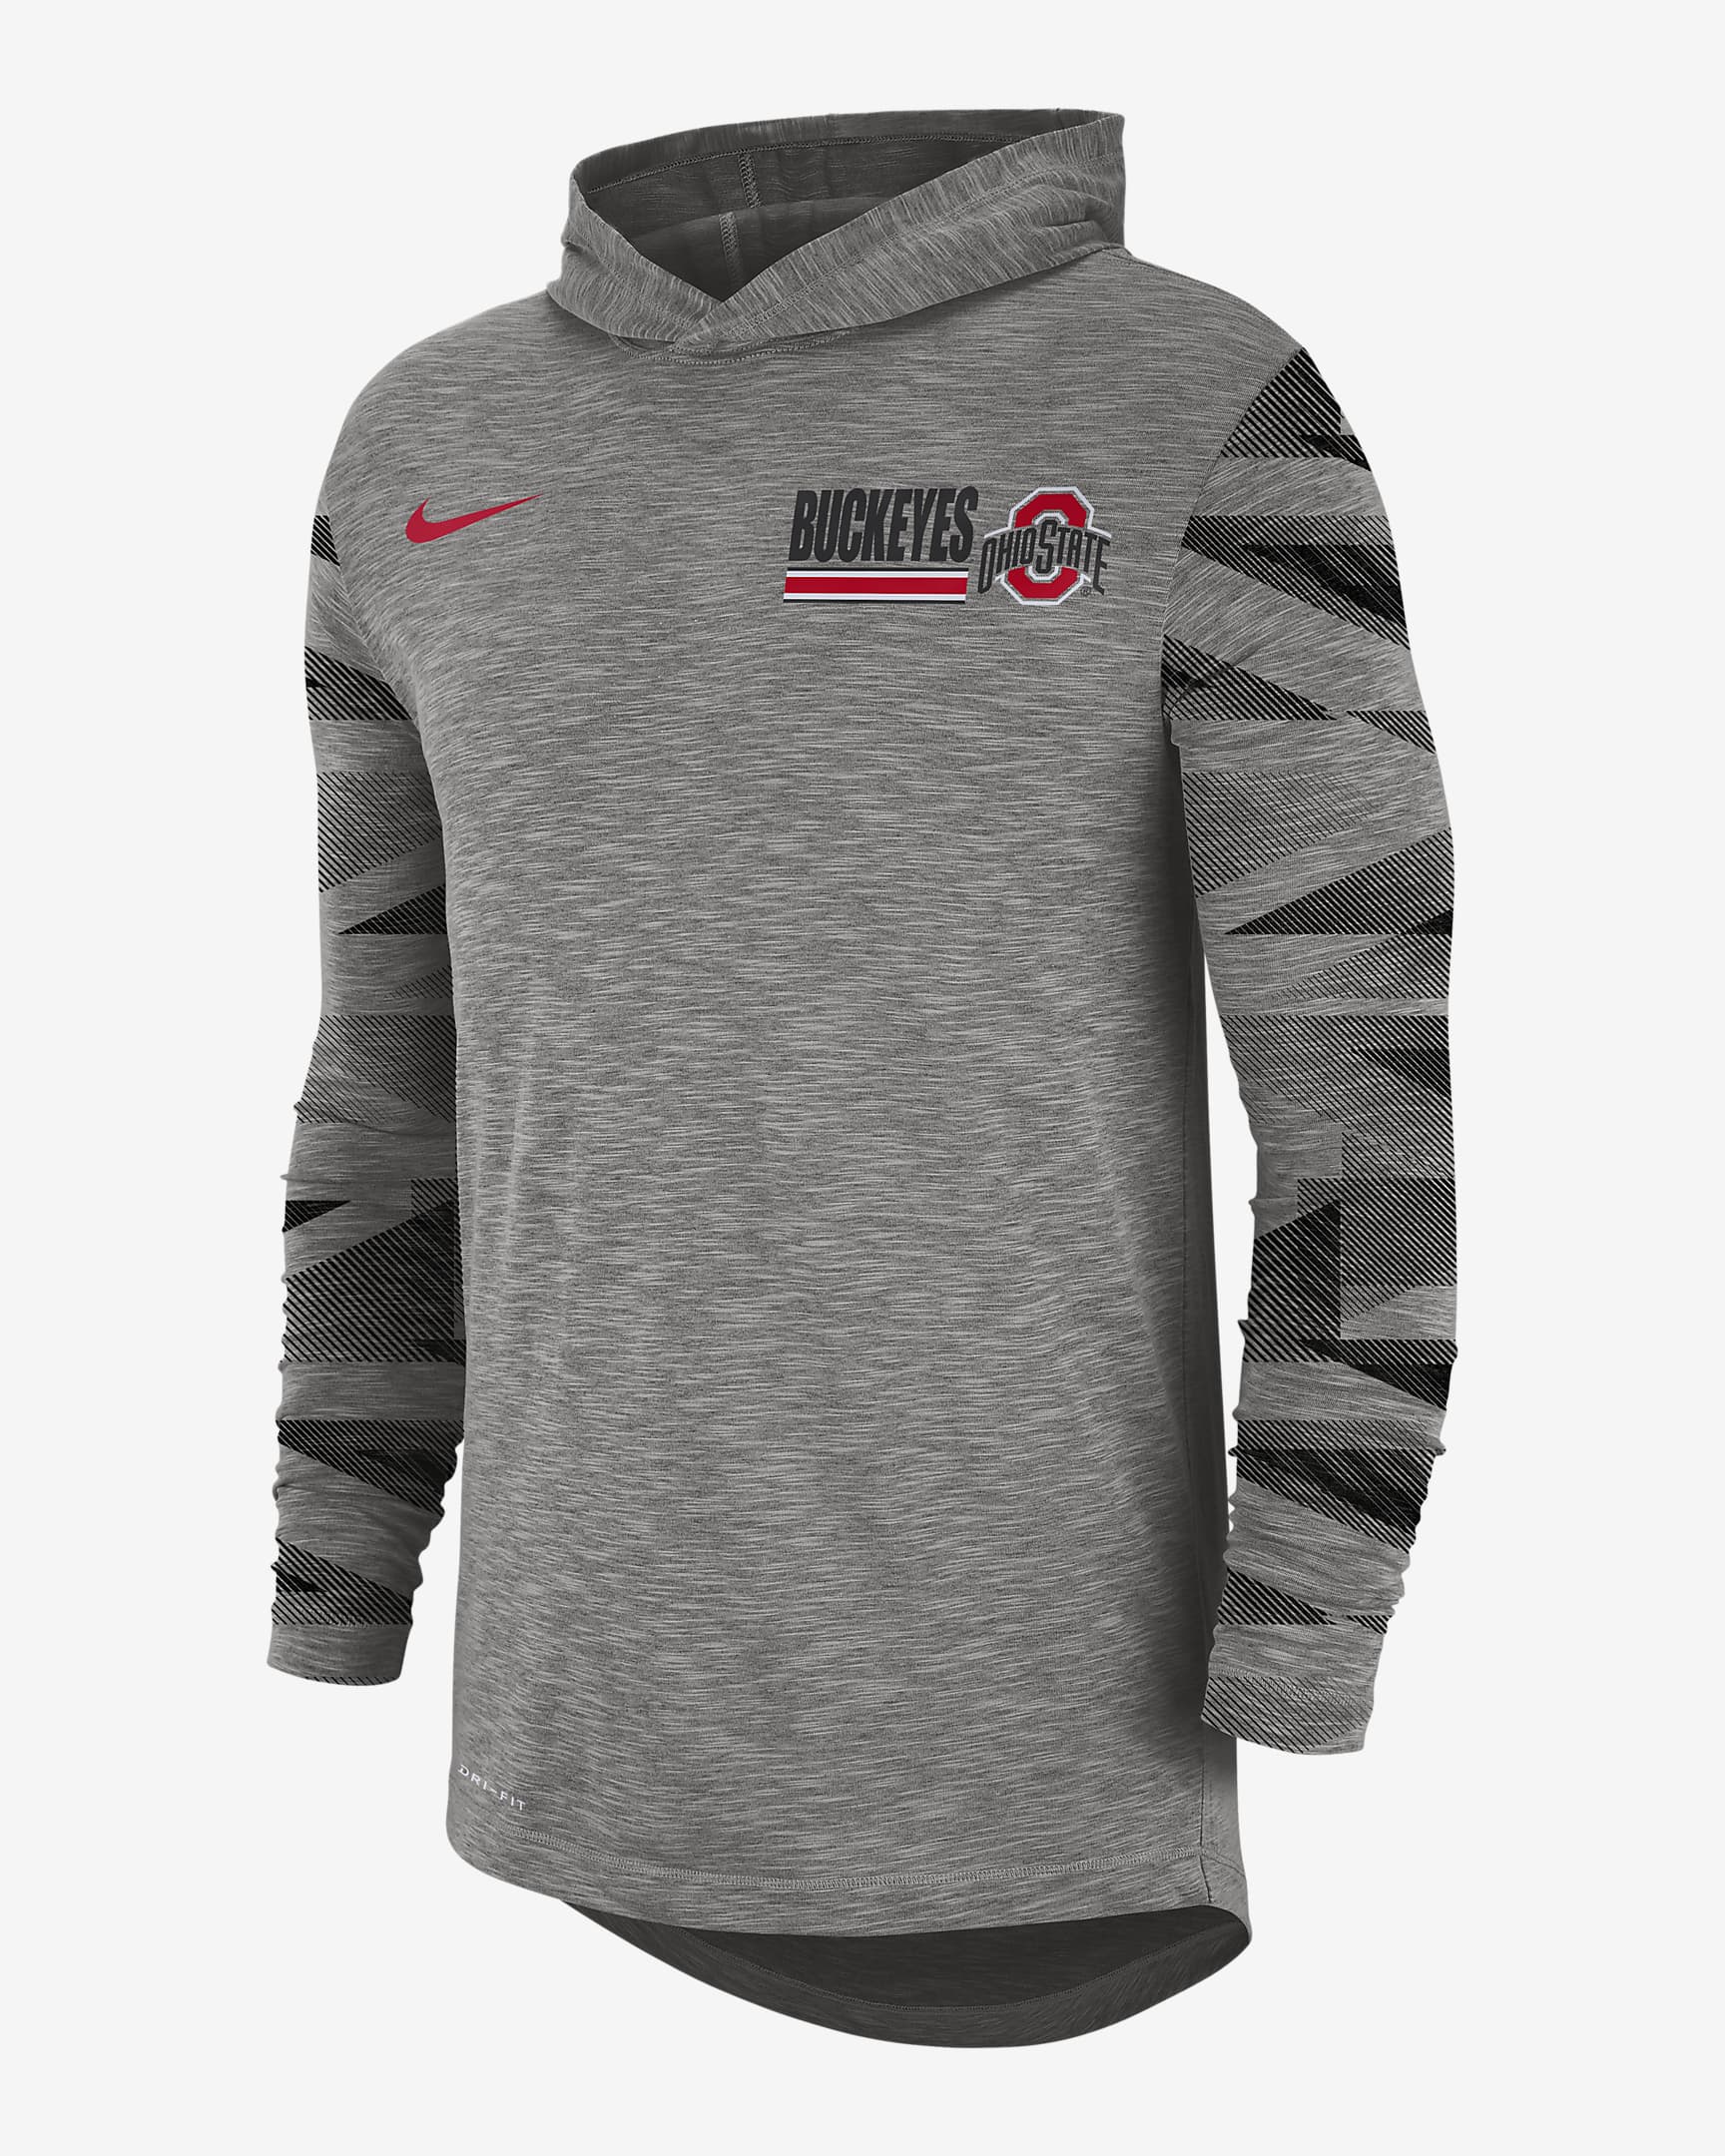 Nike College Dri-FIT (Ohio State) Men's Long-Sleeve Hooded T-Shirt ...